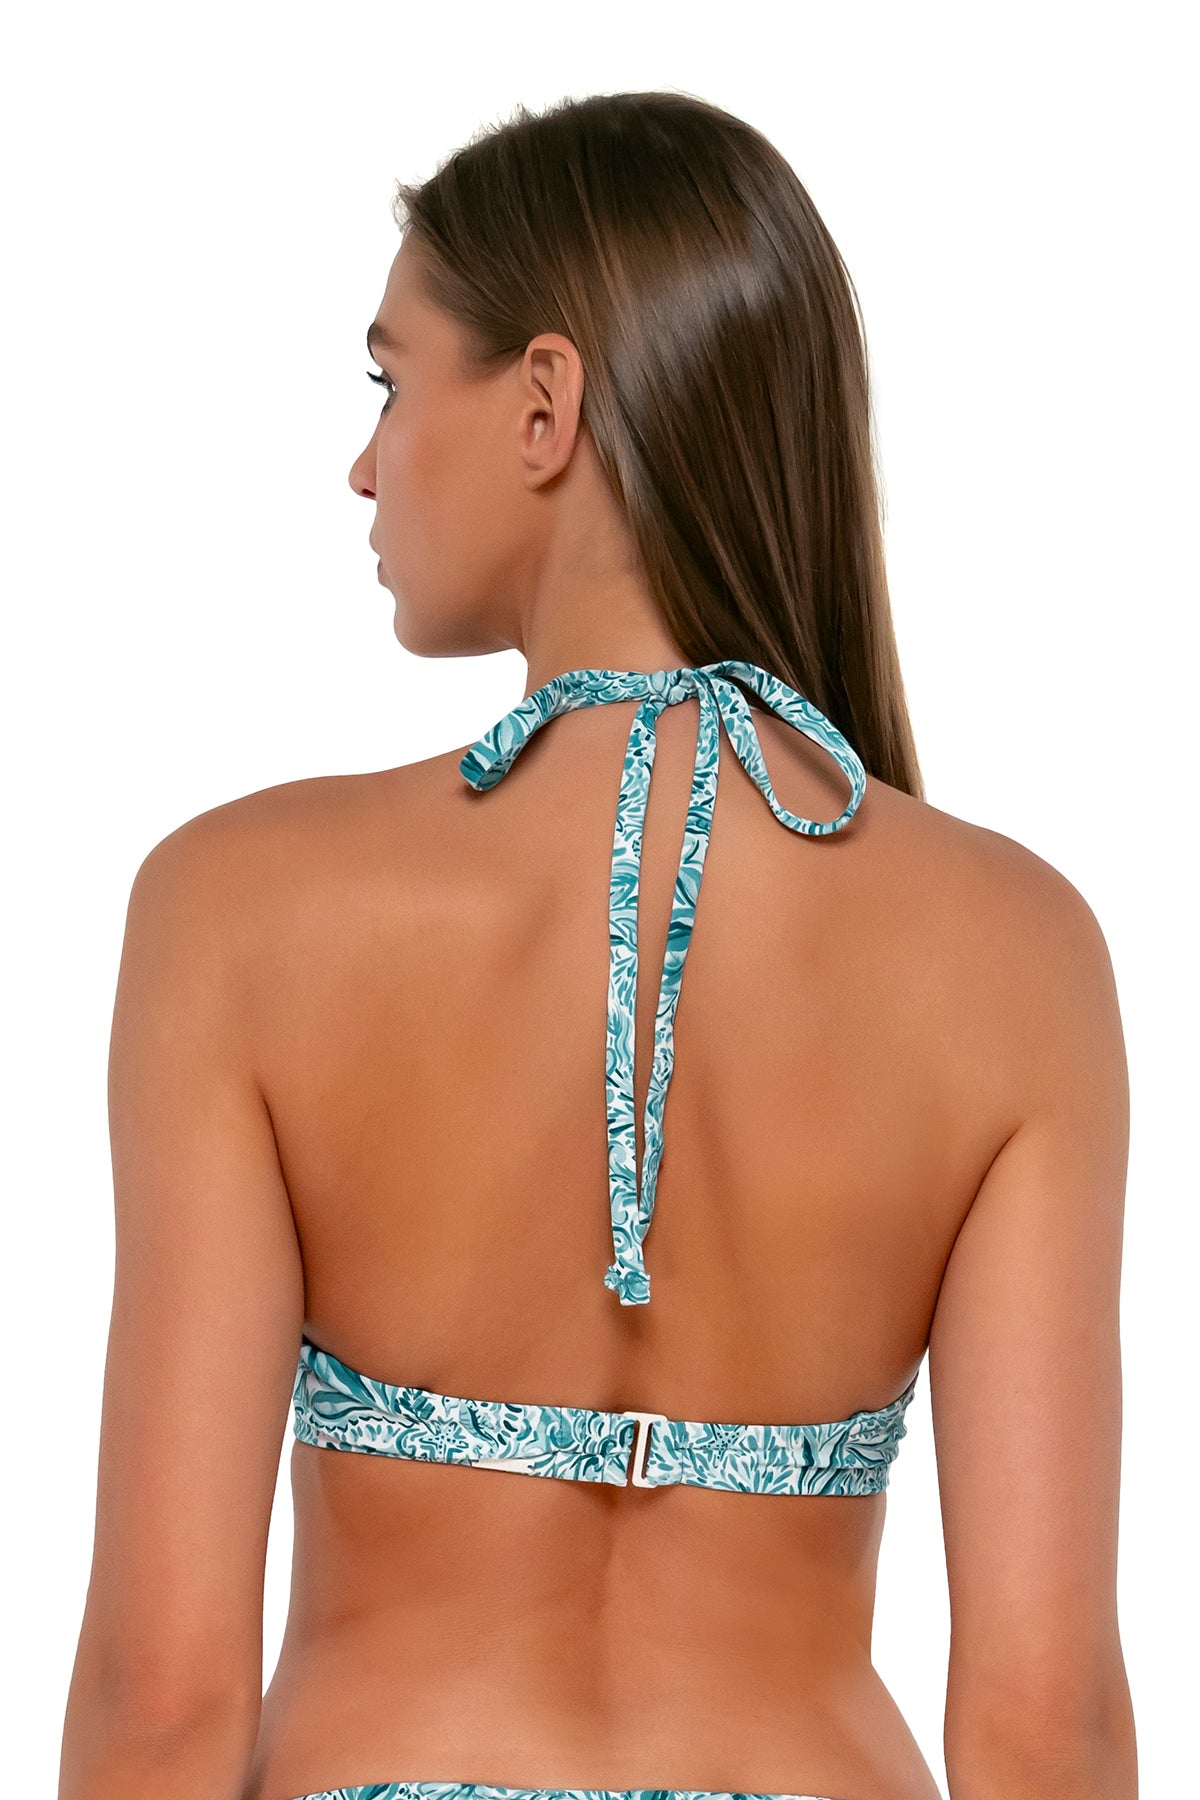 Back pose #1 of Daria wearing Sunsets By the Sea Brooke U-Wire Top showing over-the-shoulder tie